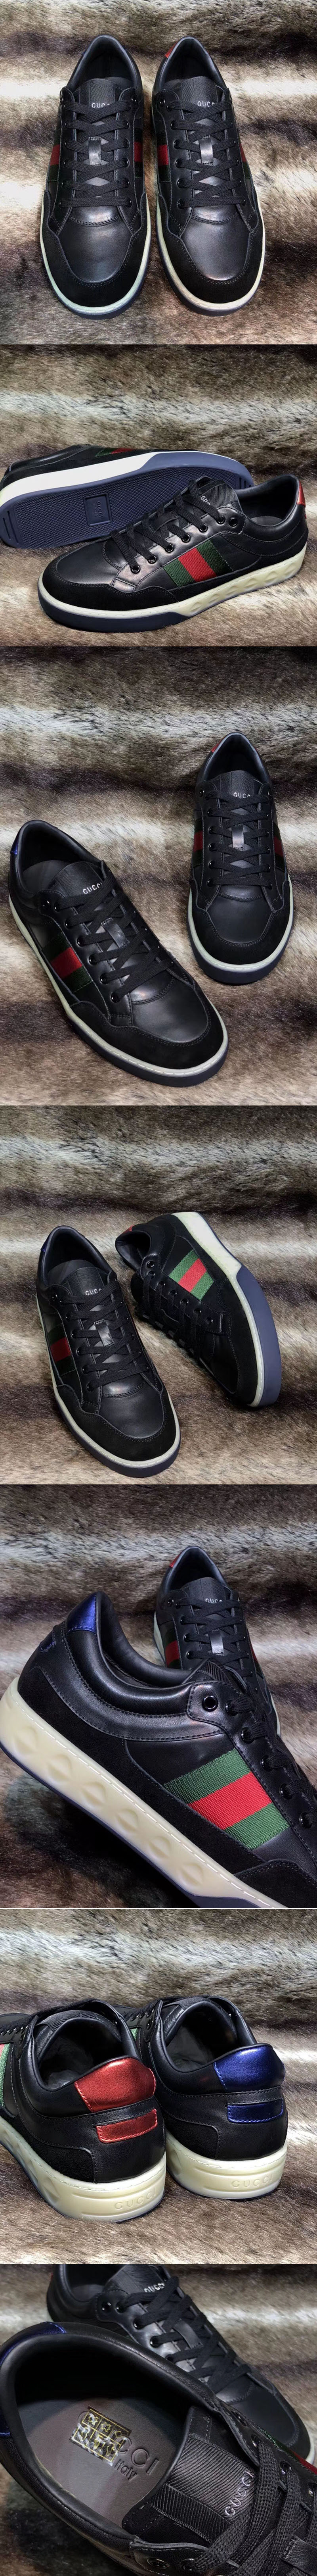 Replica Gucci 386750 Ace leather sneaker and shoes Black Leather